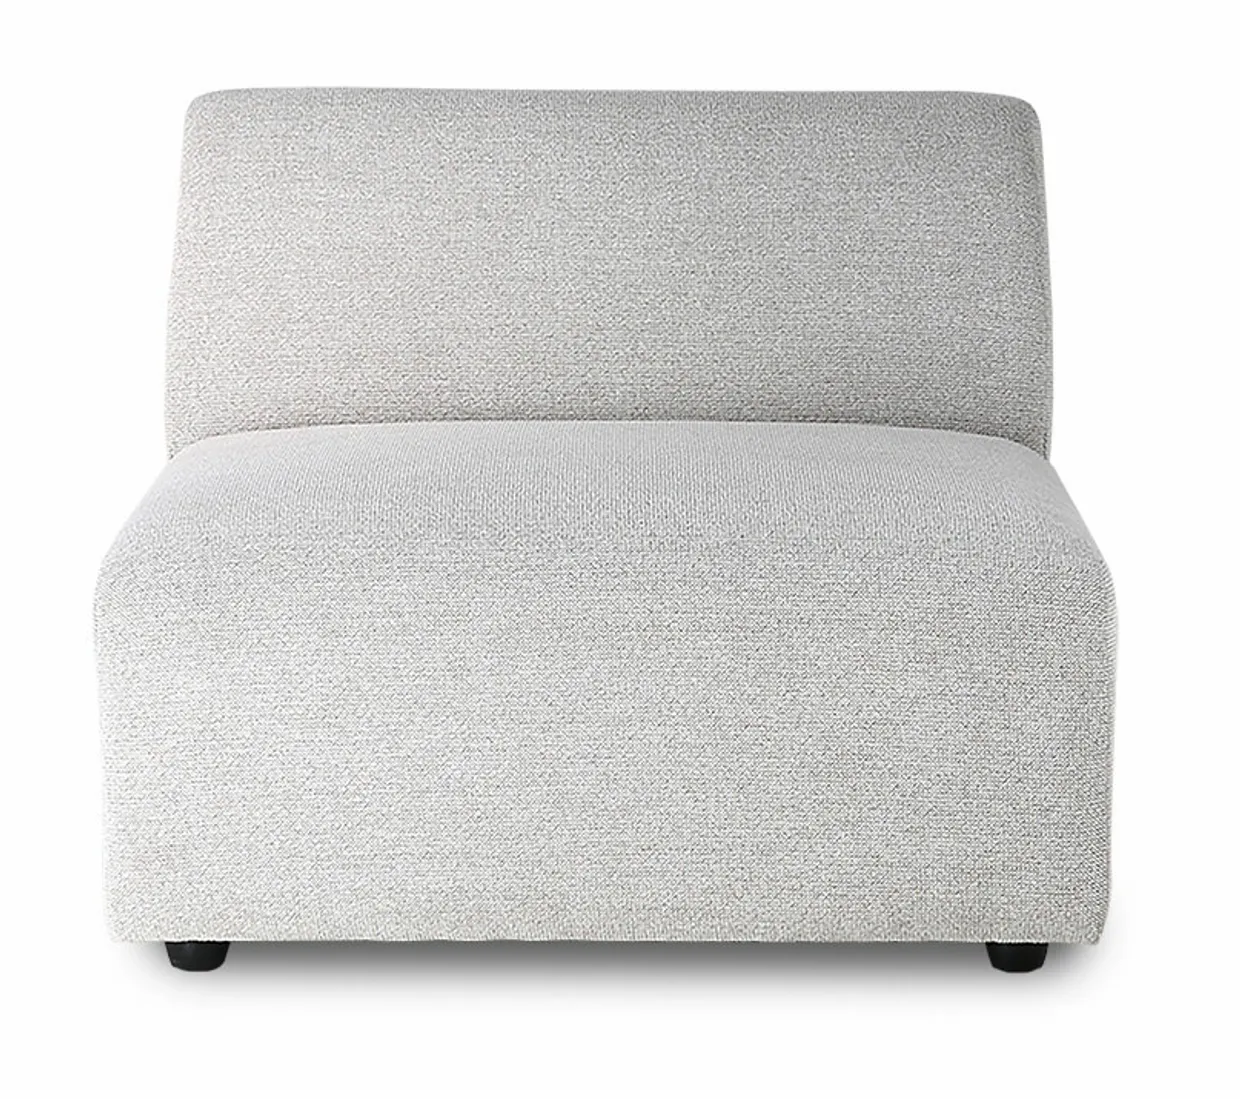 Jax couch: element middle, sneak, light grey